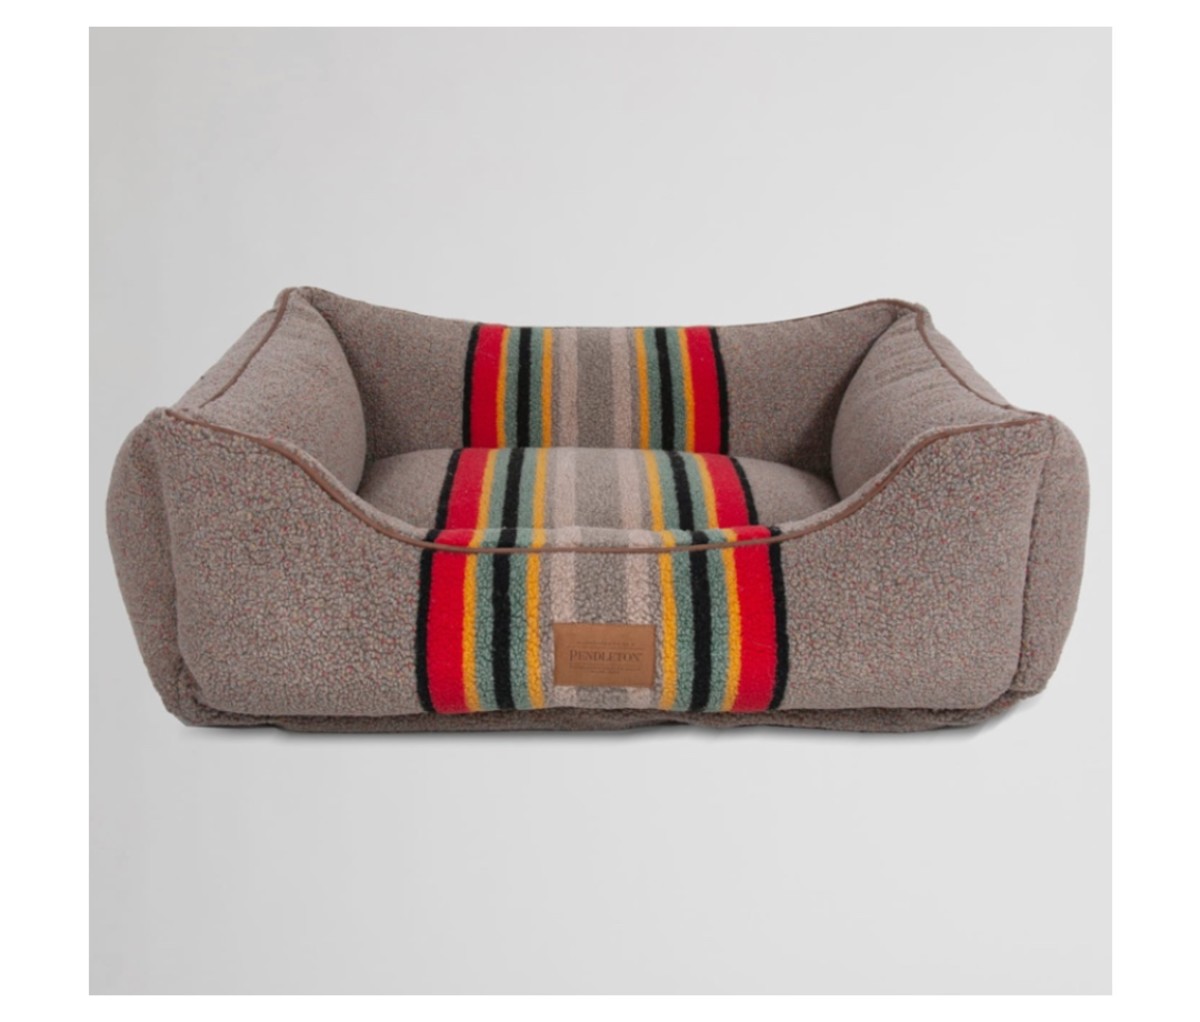 Gray and multi-striped dog bed on an off-white background.